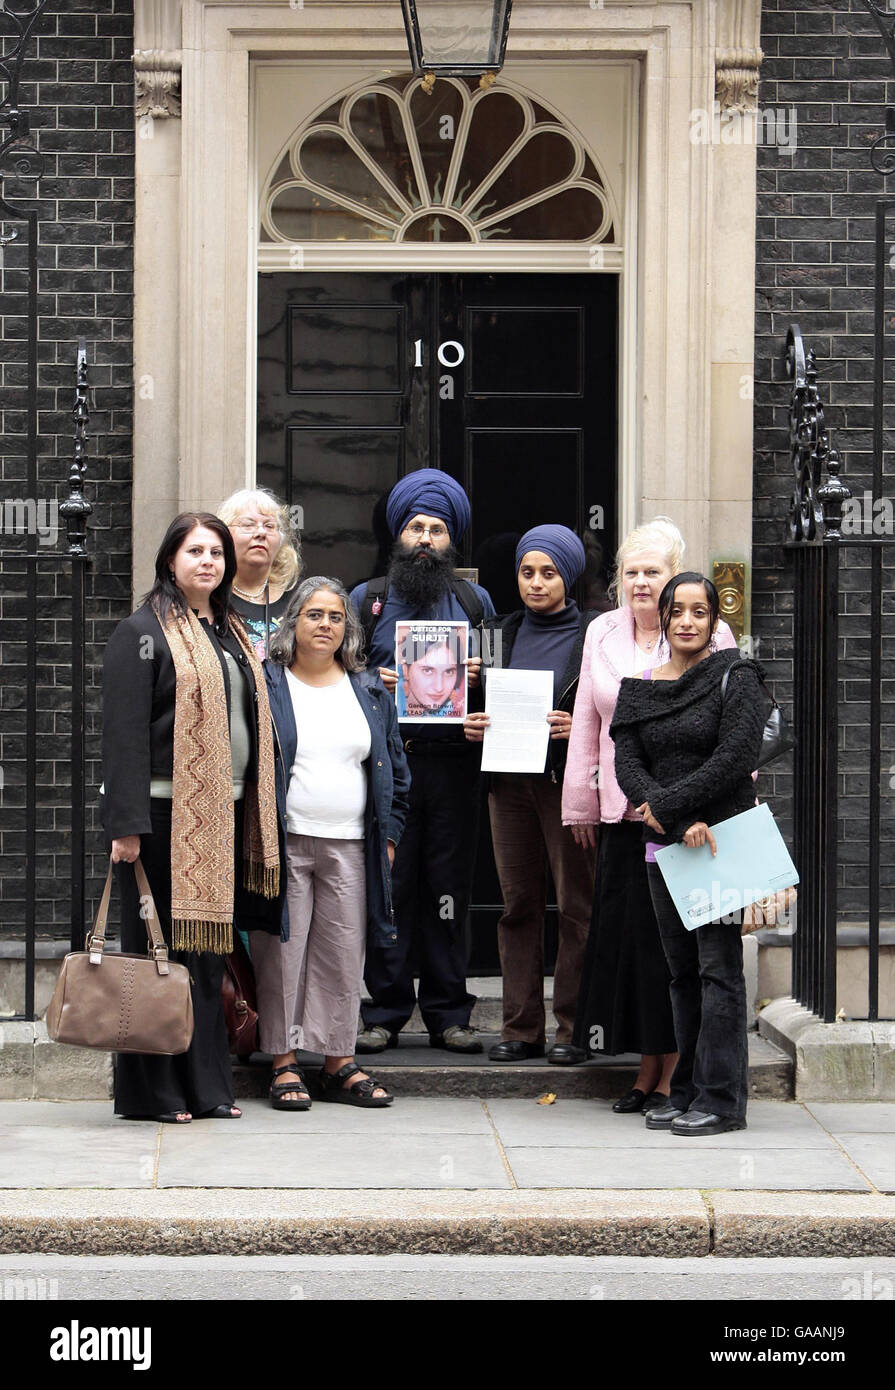 Family and friends of Surjit Kaur Athwal, who was the victim of an honour killing organised by her husband and 70 year old mother-in-law, (from the left) Diana Nammi, Iranian & Kurdish Womens Rights Org.; Kathryn Zoechild, Treasurer of Justice for Surjit Campaign; Hannanah Siddiqui, Southall Black Sisters; Jagdeesh Singh, brother of Surjit; Paramjeet Kaur, wife of Jagdeesh Singh; Susanne Lamido, Islington Community Activist and Charanjit Kaur, sister of Paramjeet Kaur, hand in a petition to 10 Downing Street requesting a public inquiry be carried out to investigate the handling of the case. Stock Photo